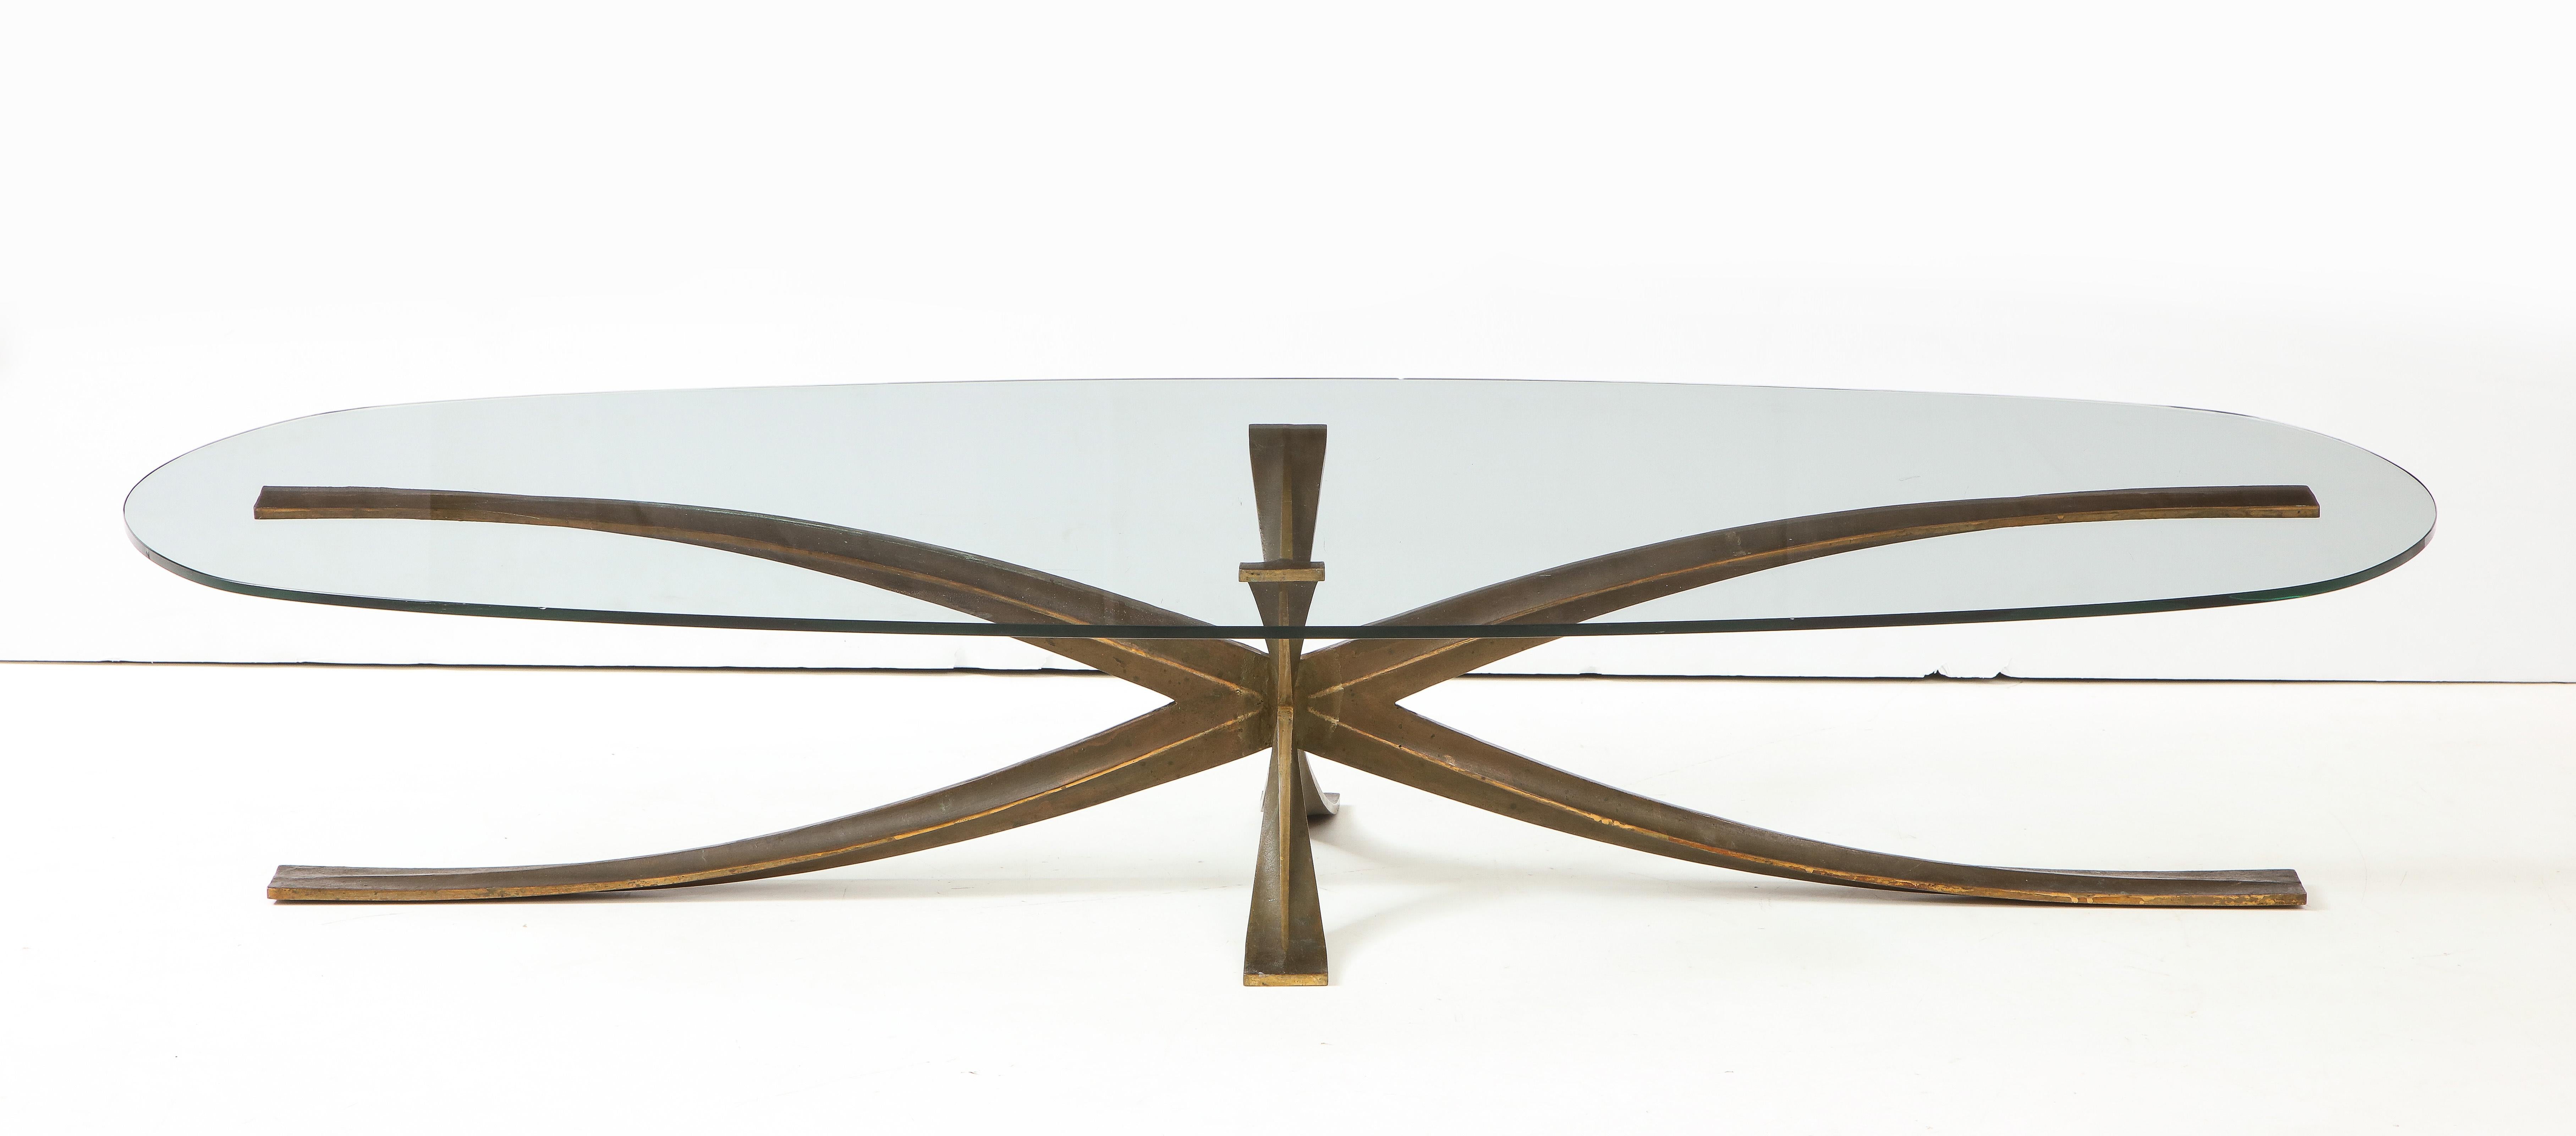 The iconic elongated bronze coffee table by French designer, Michel Mangmatin. His design was influenced by Mies Van deer Rohe’s Barecelona chair.


Michel Mangmatin
France (Born in 1928)
French architect Michel Mangematin settles in the United